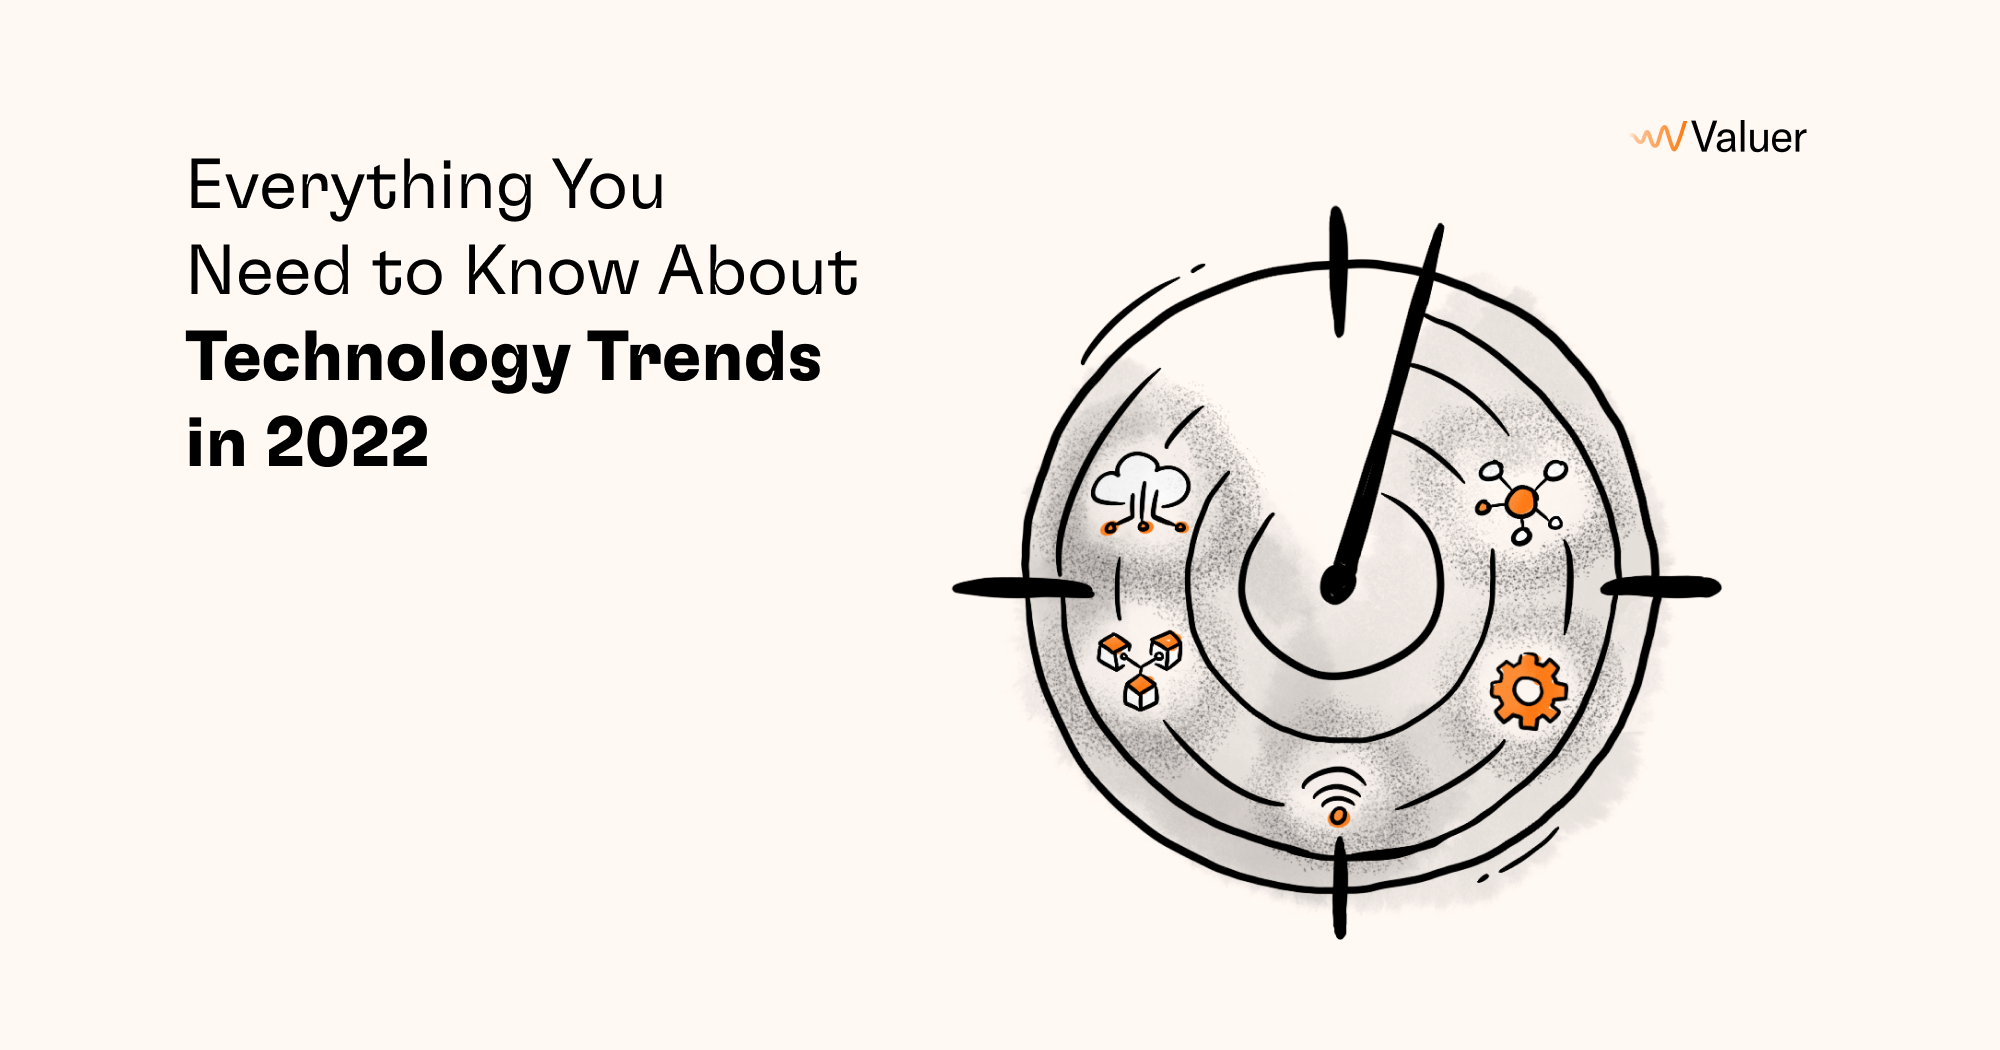 Everything You Need to Know About Technology Trends in 2022